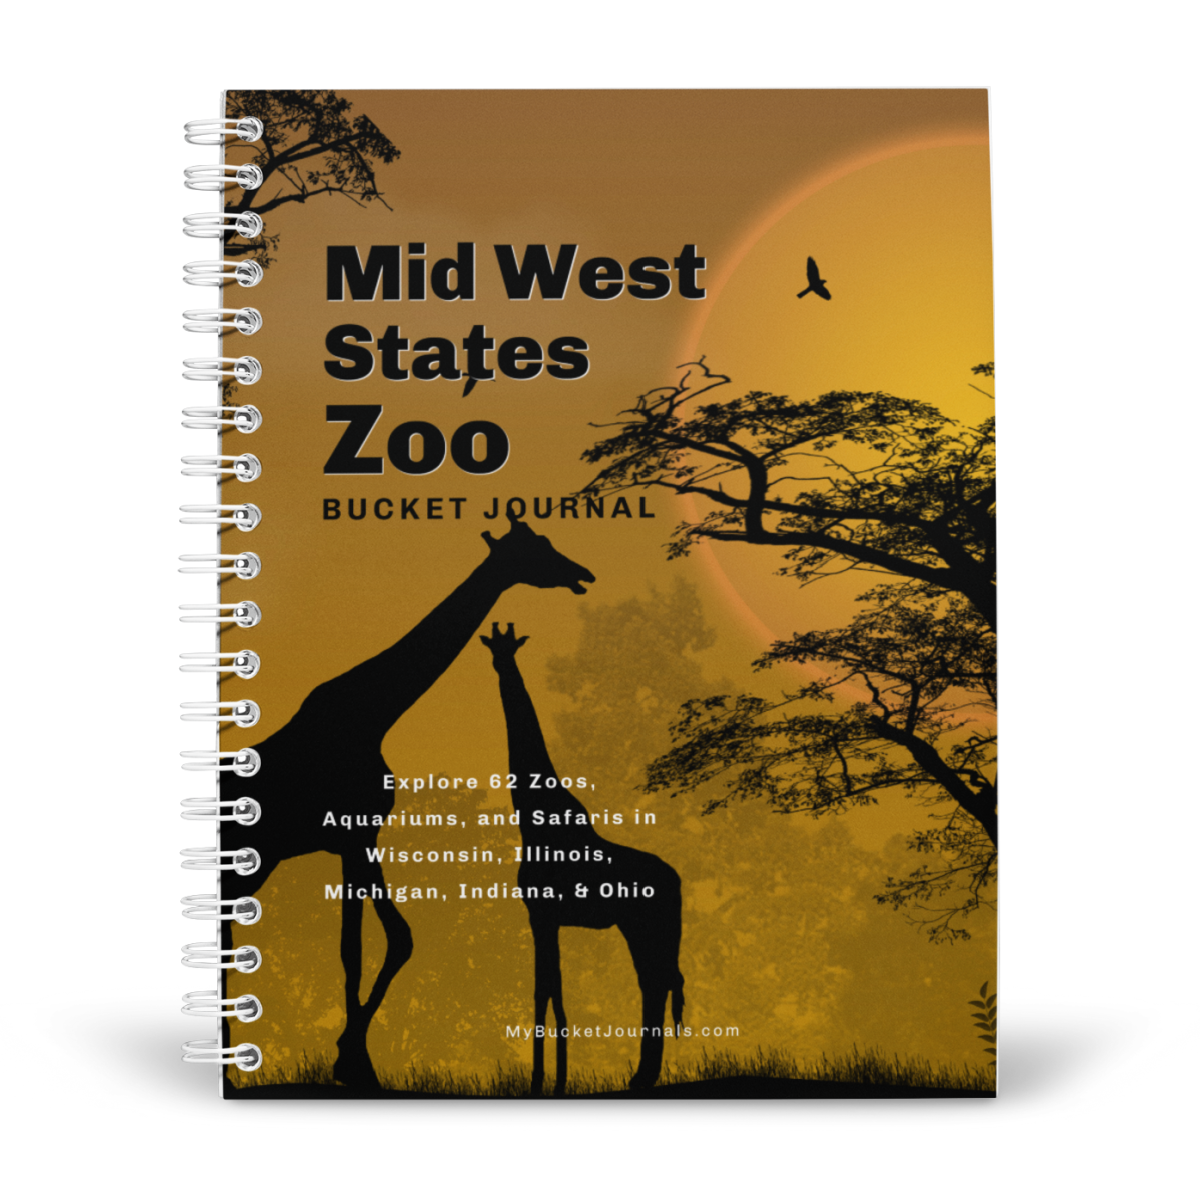 Midwest States Zoo Bucket Journal